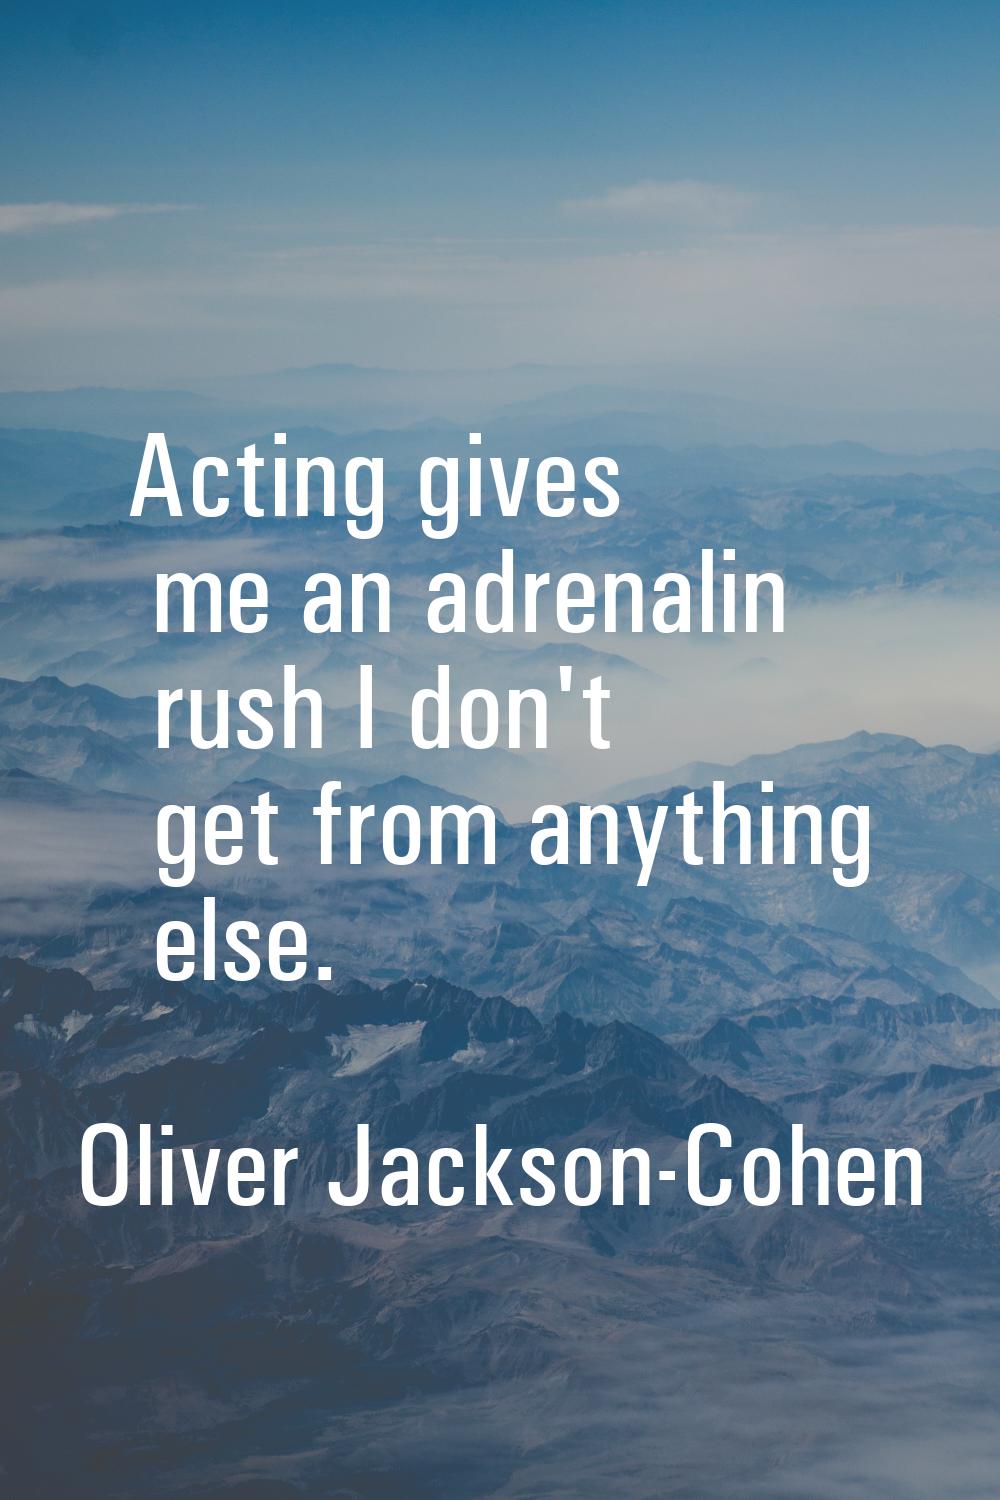 Acting gives me an adrenalin rush I don't get from anything else.